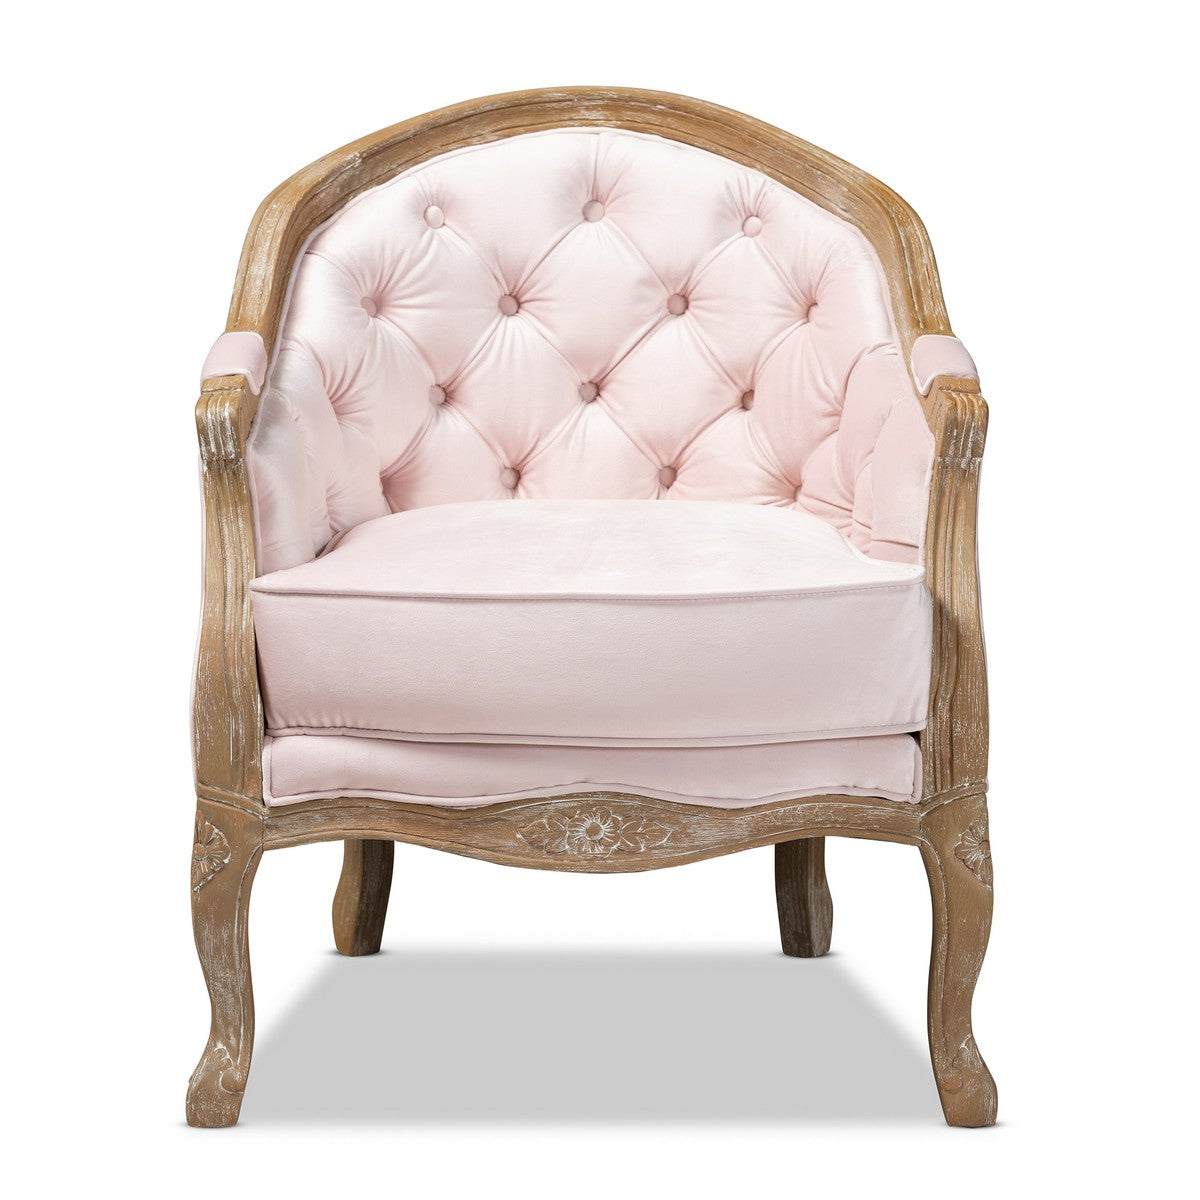 Baxton Studio Genevieve Traditional French Provincial Light Pink Velvet Upholstered White-Washed Oak Wood Armchair Baxton Studio-chairs-Minimal And Modern - 1